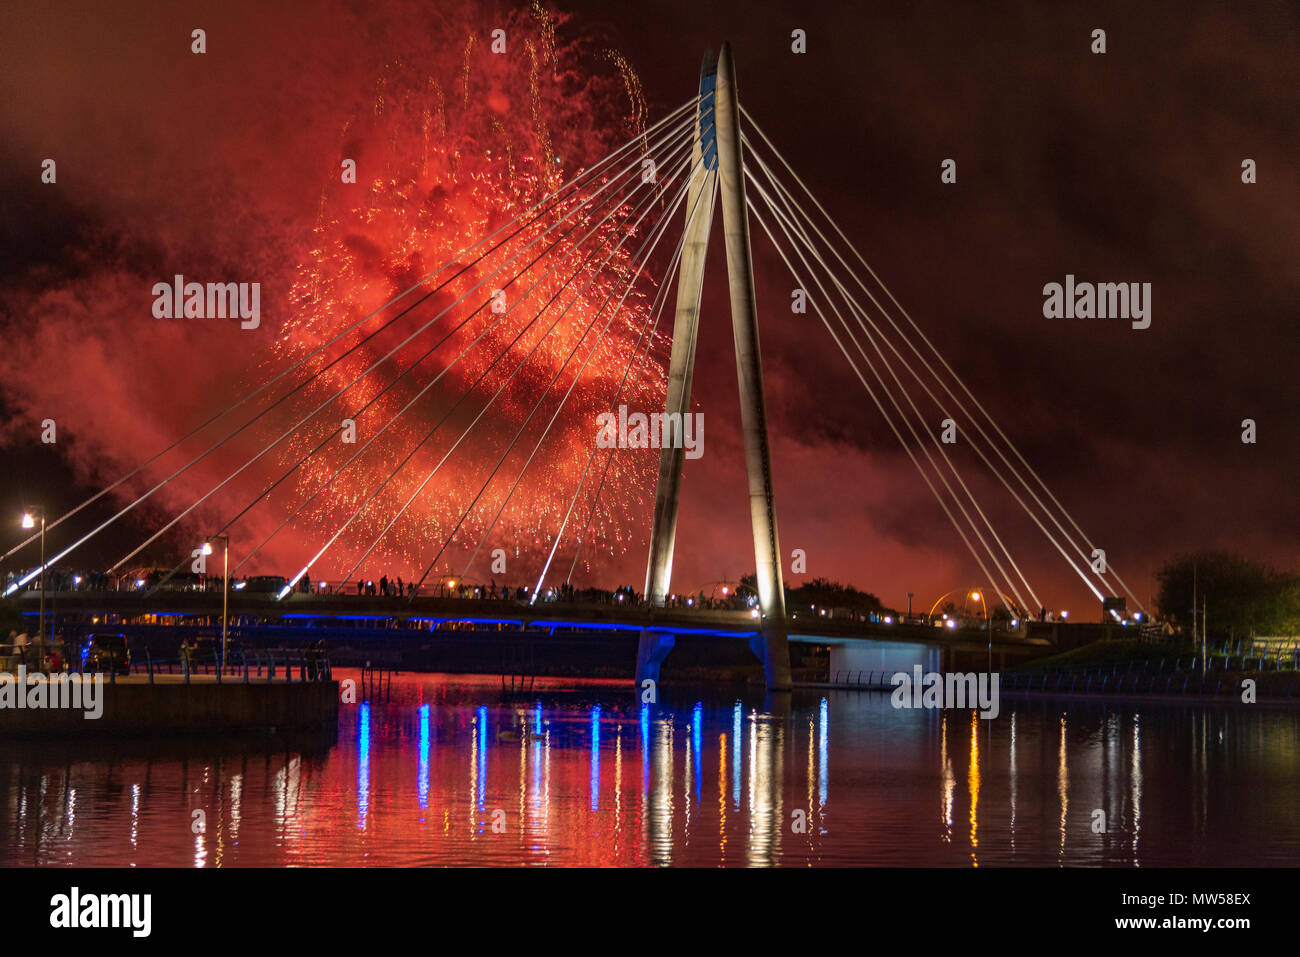 Fireworks over the Marine Way bridge in Southport. Part of the annual fireworks competition. Stock Photo